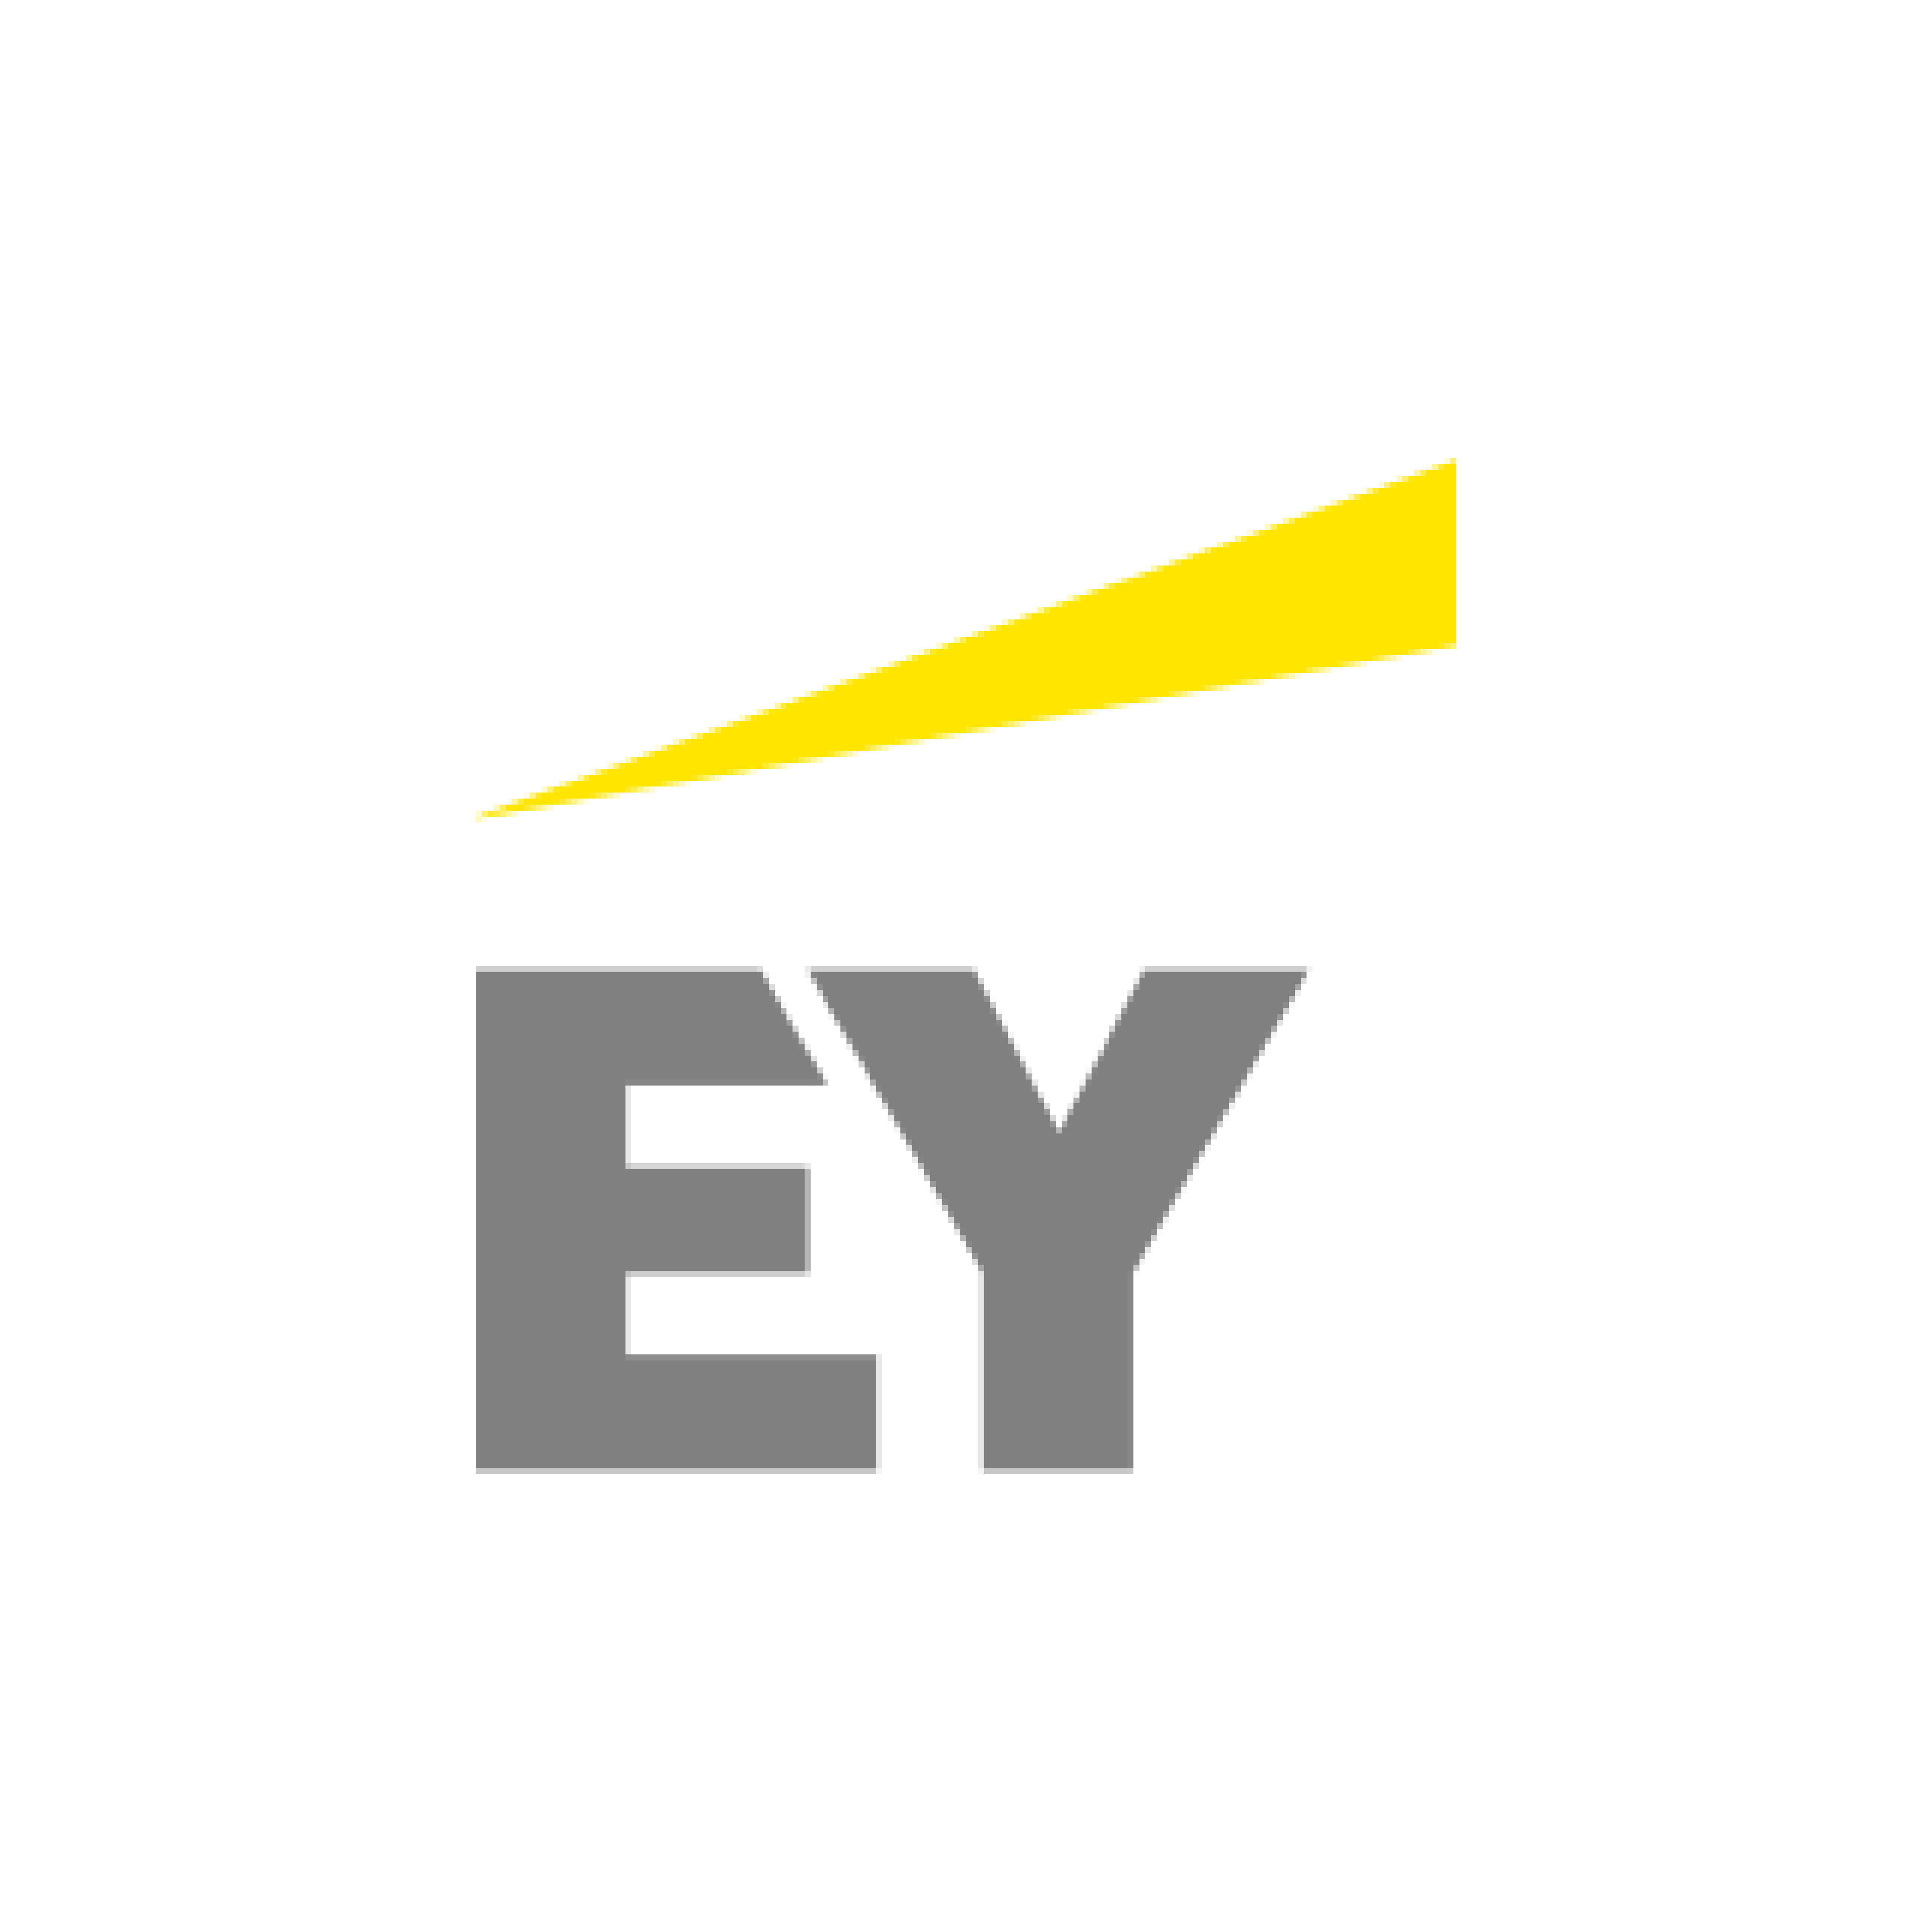 Ernst & Young Global Limited, trade name EY logo